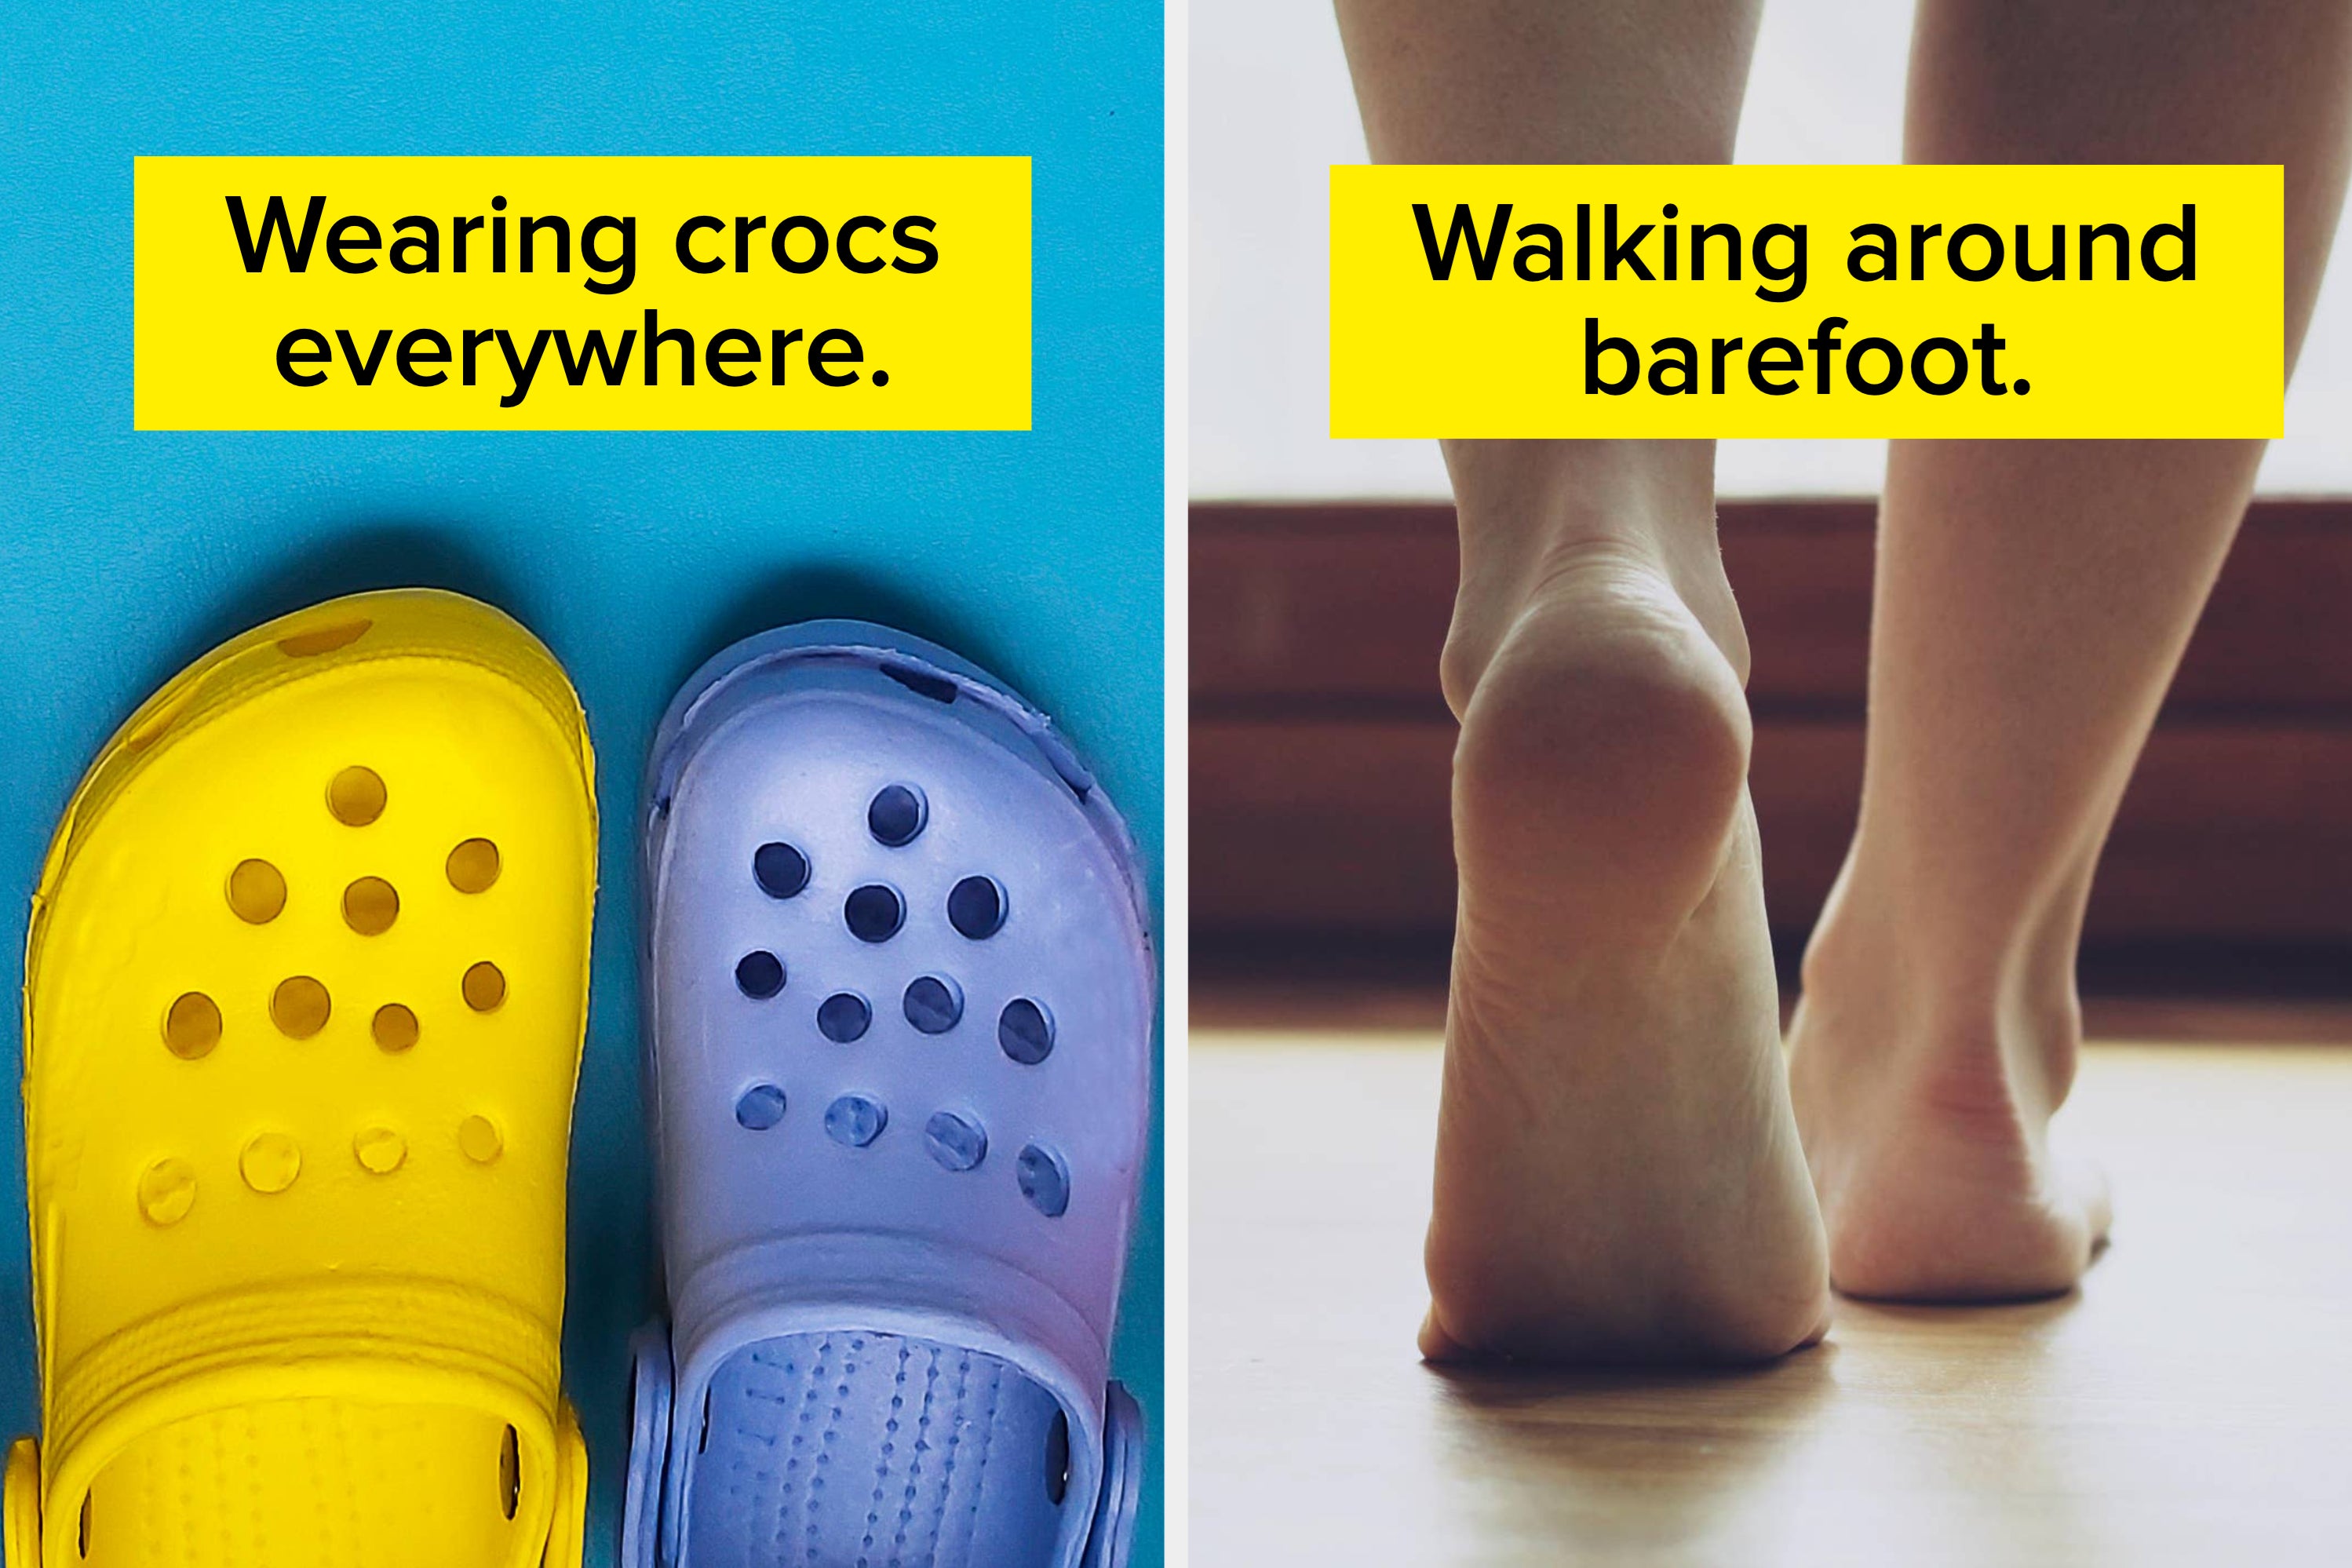 If You Love Wearing Crocs, Experts Say You Might Wanna Rethink This — Here’s Why